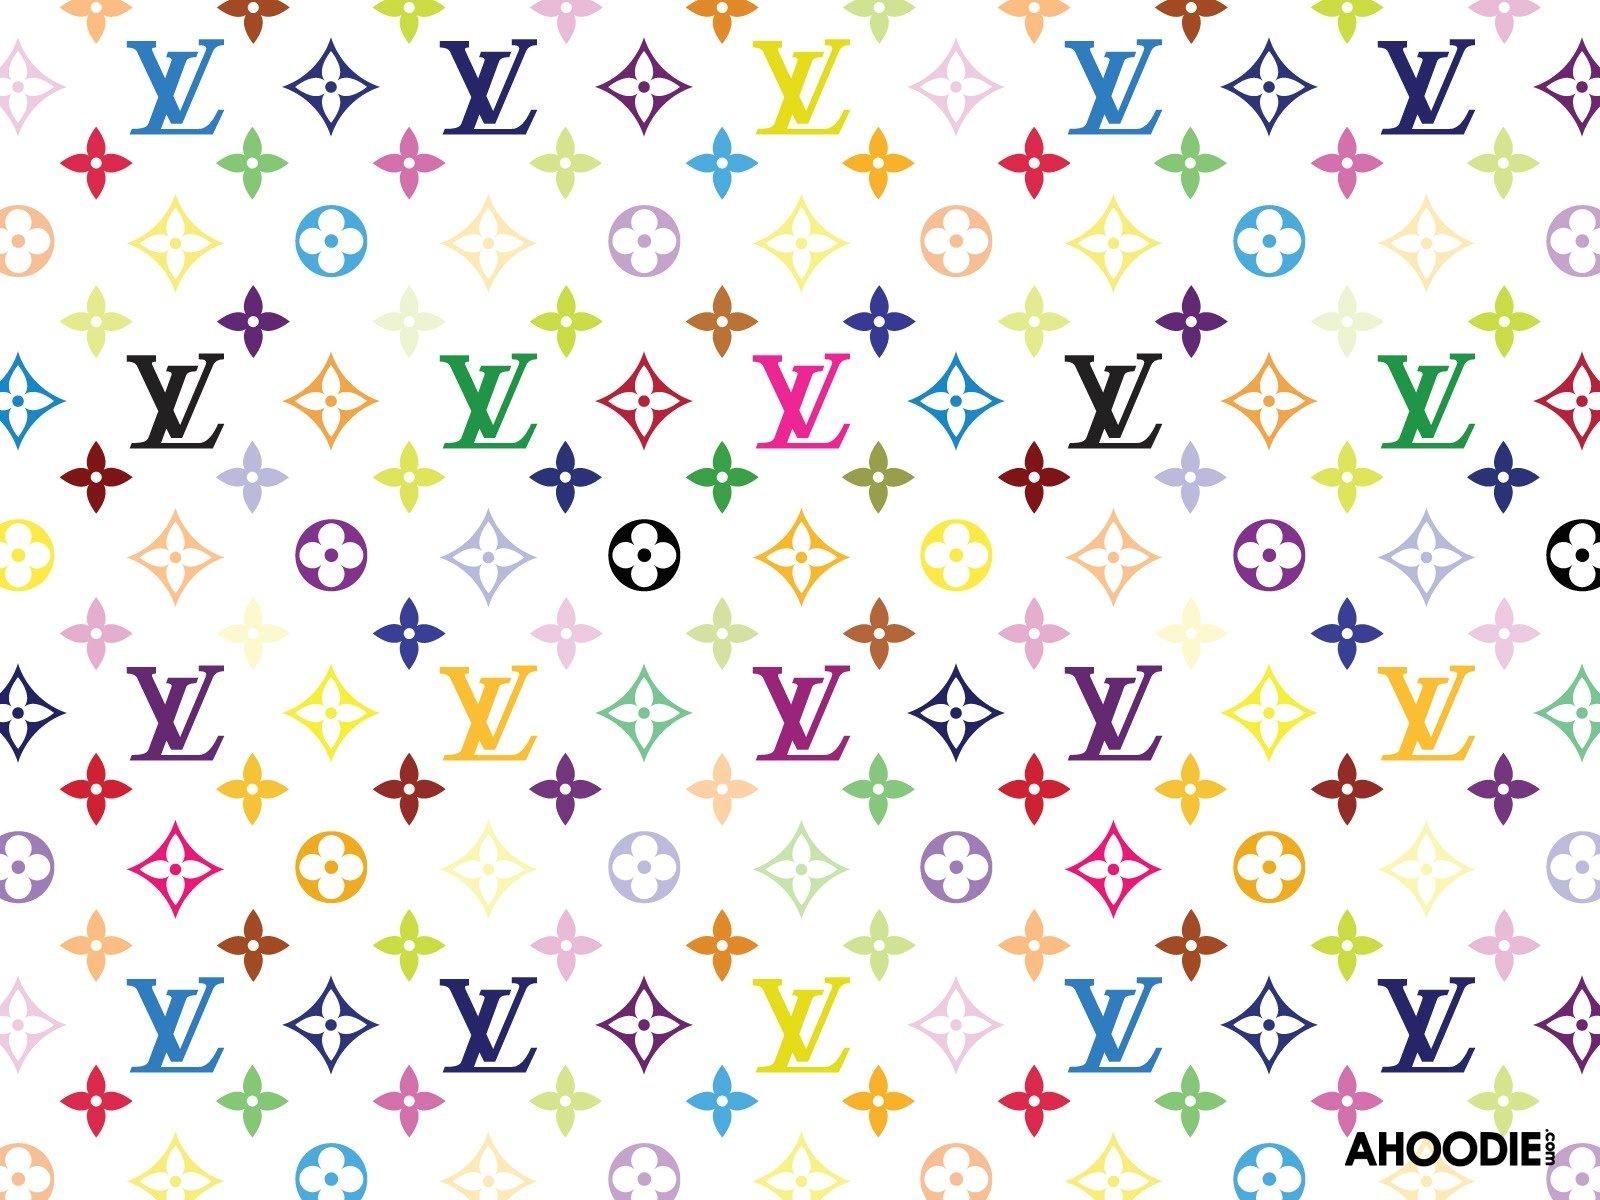 LV Colorful